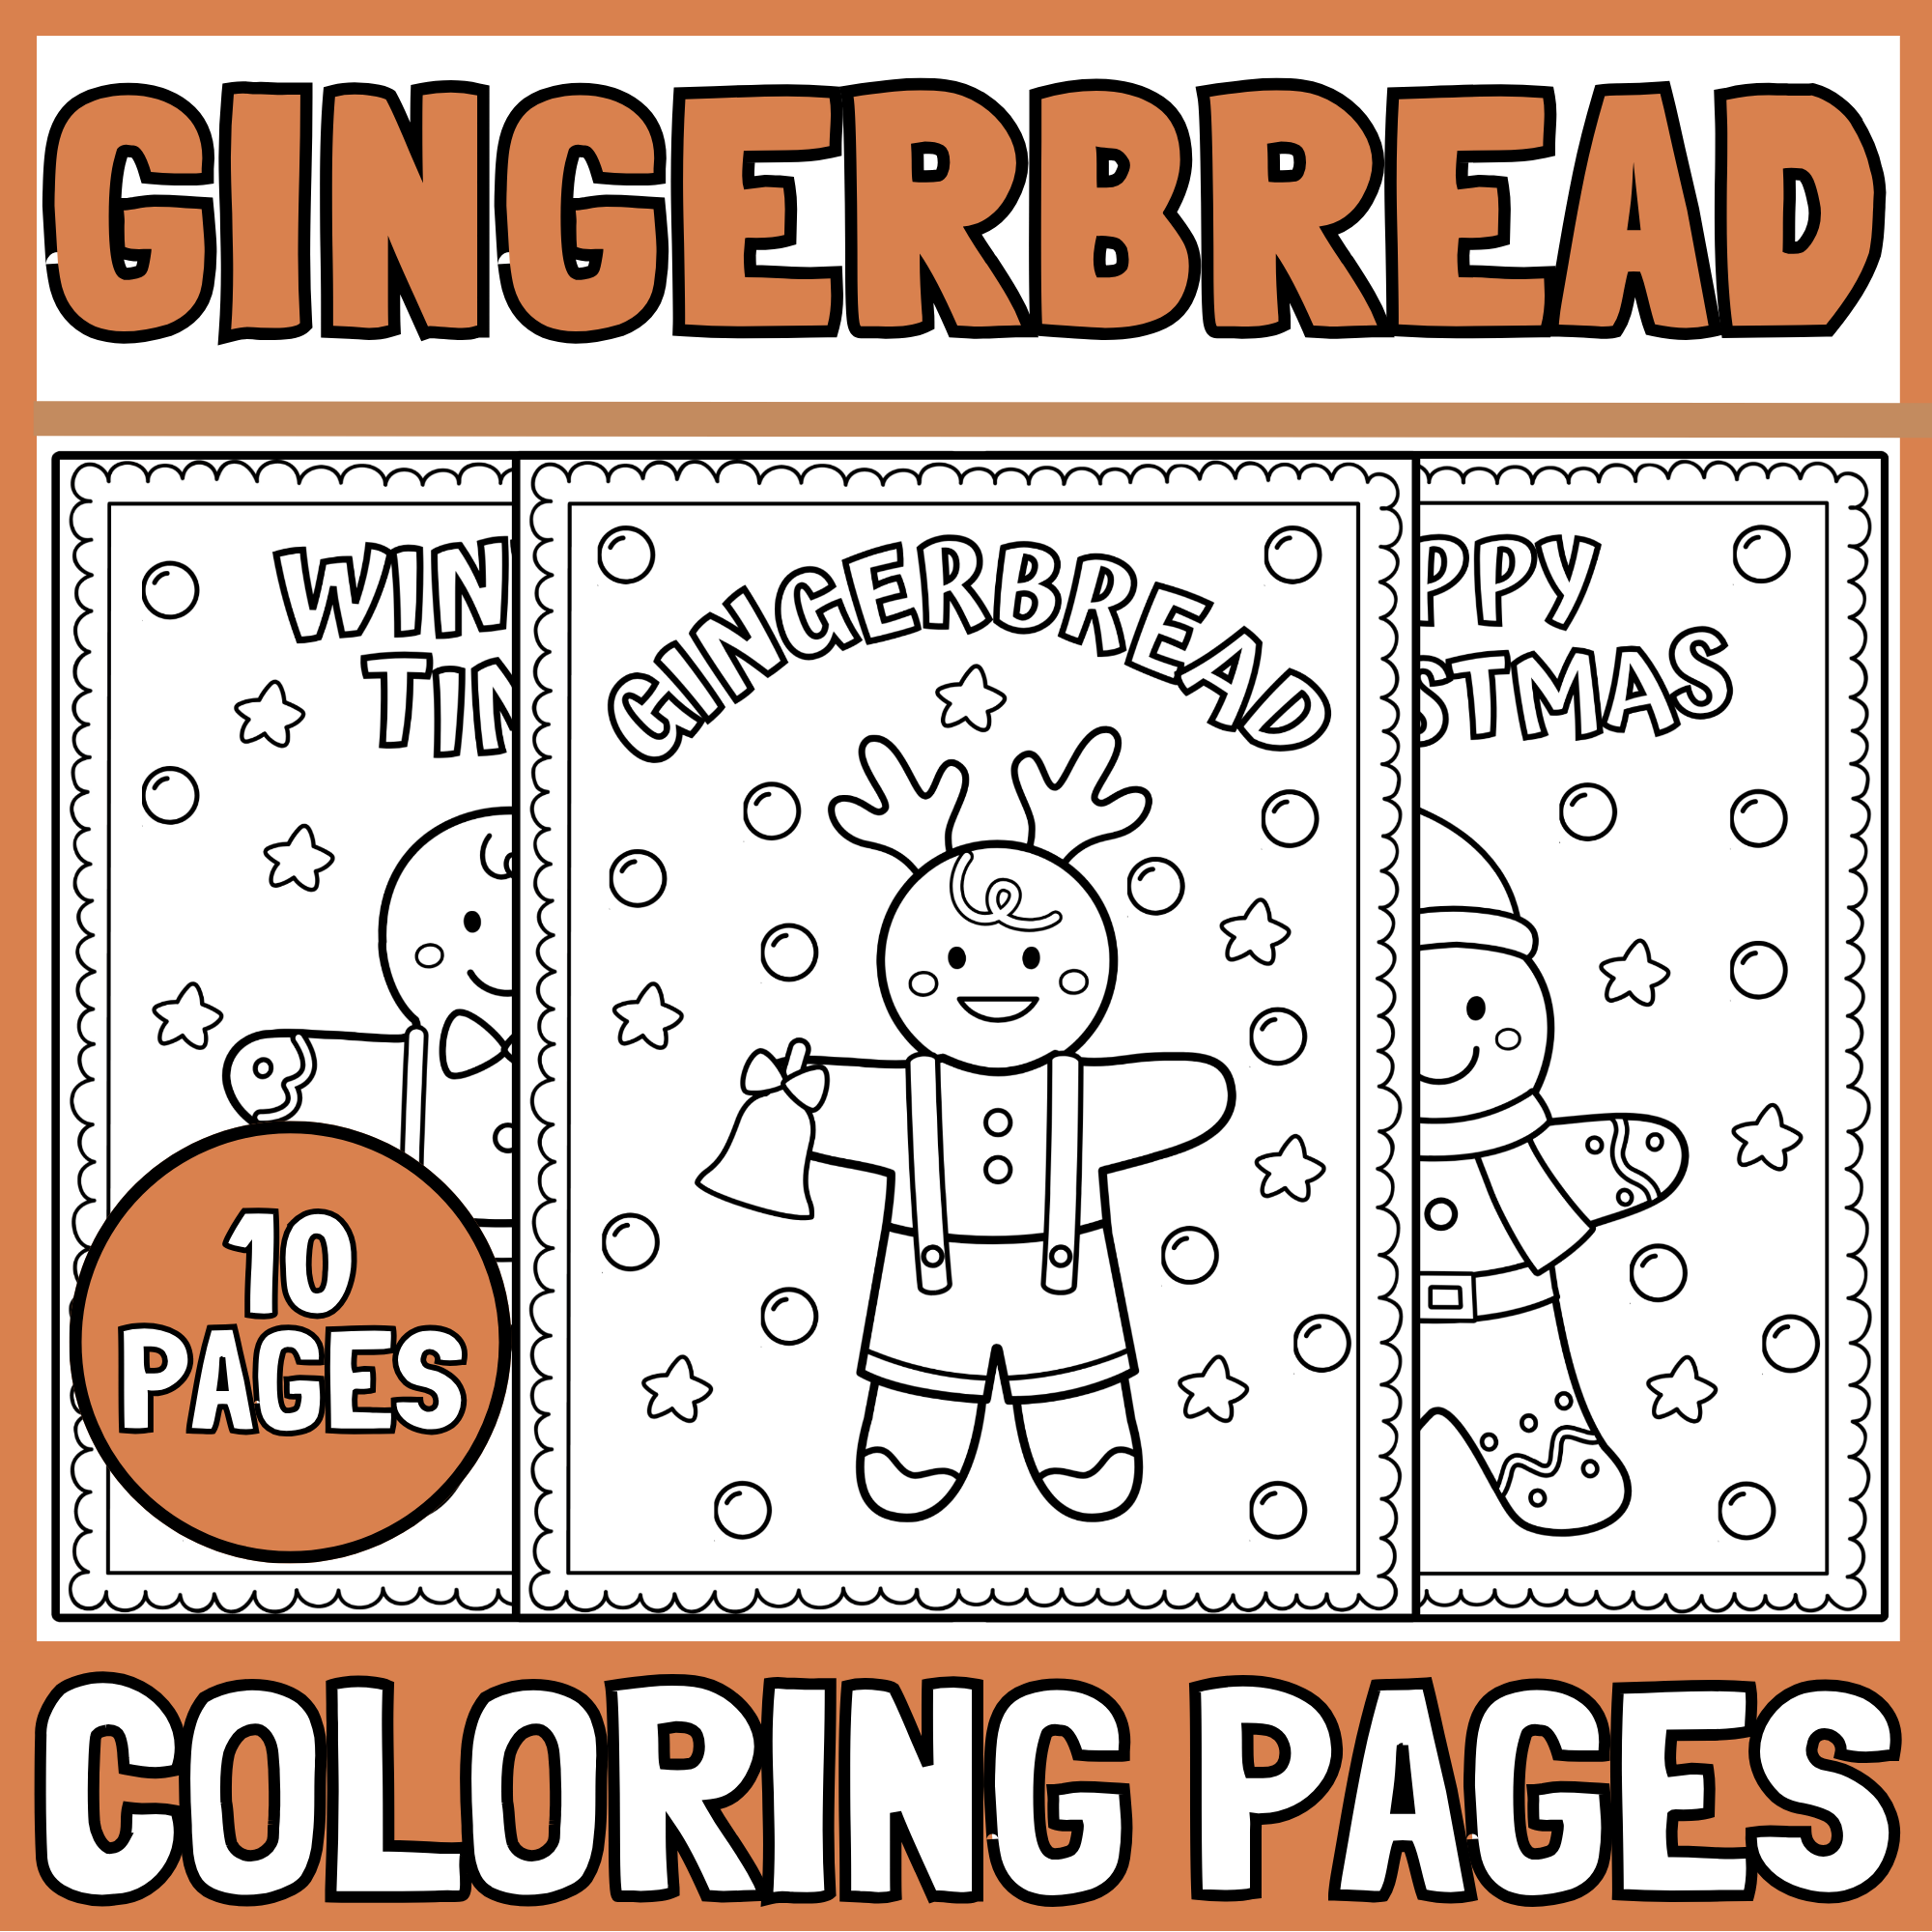 Gingerbread man coloring pages gingerbread man coloring sheets made by teachers